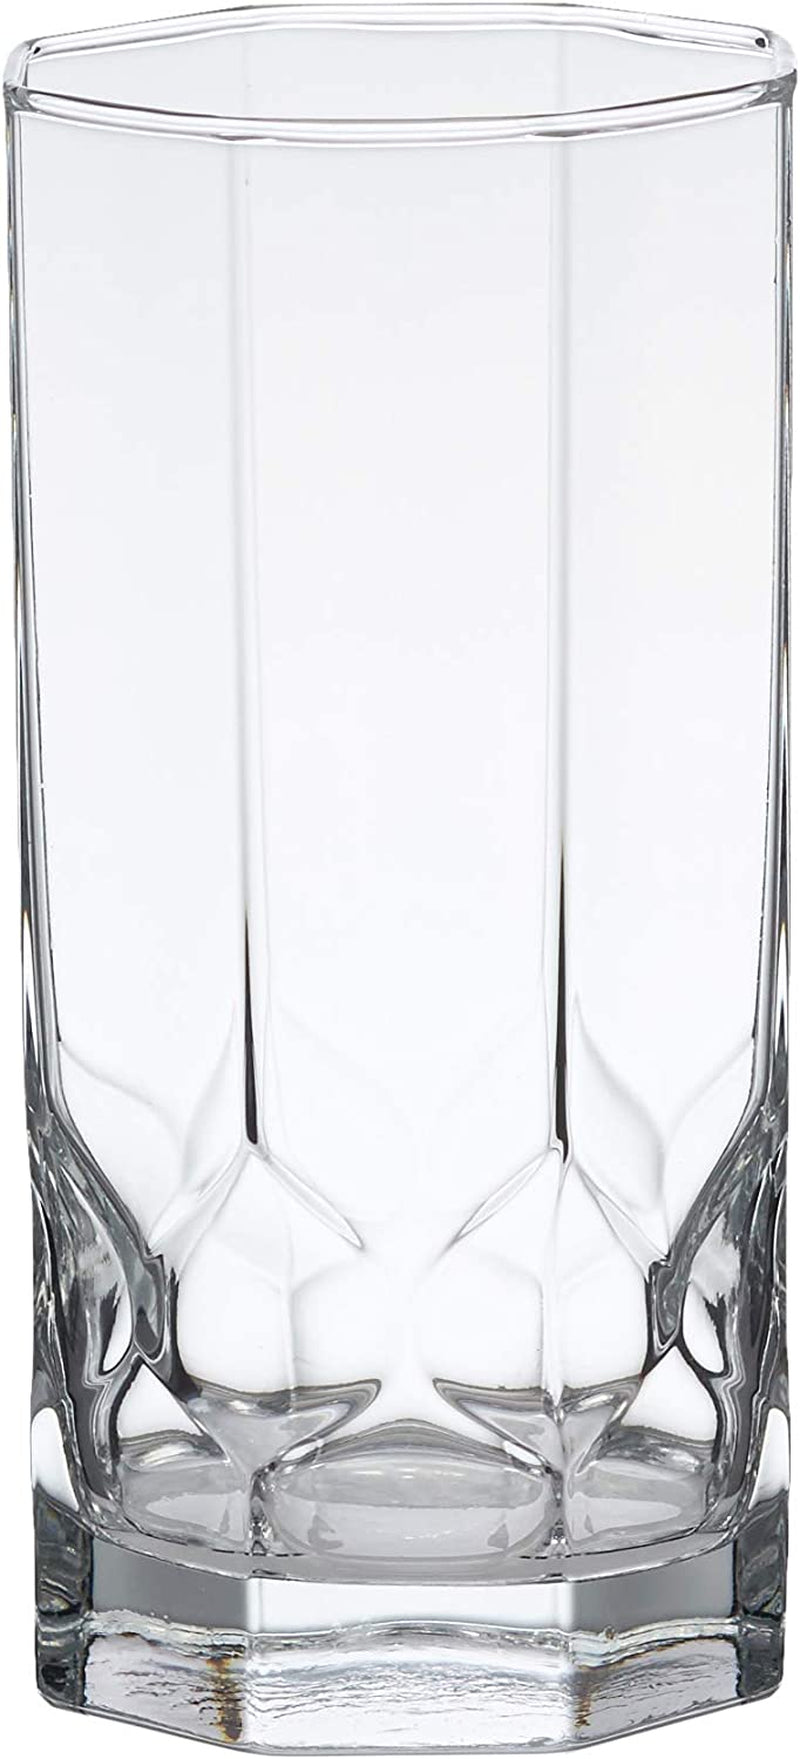 Terrace Coolers Glass Drinkware Set, 16-Ounce, Set of 6